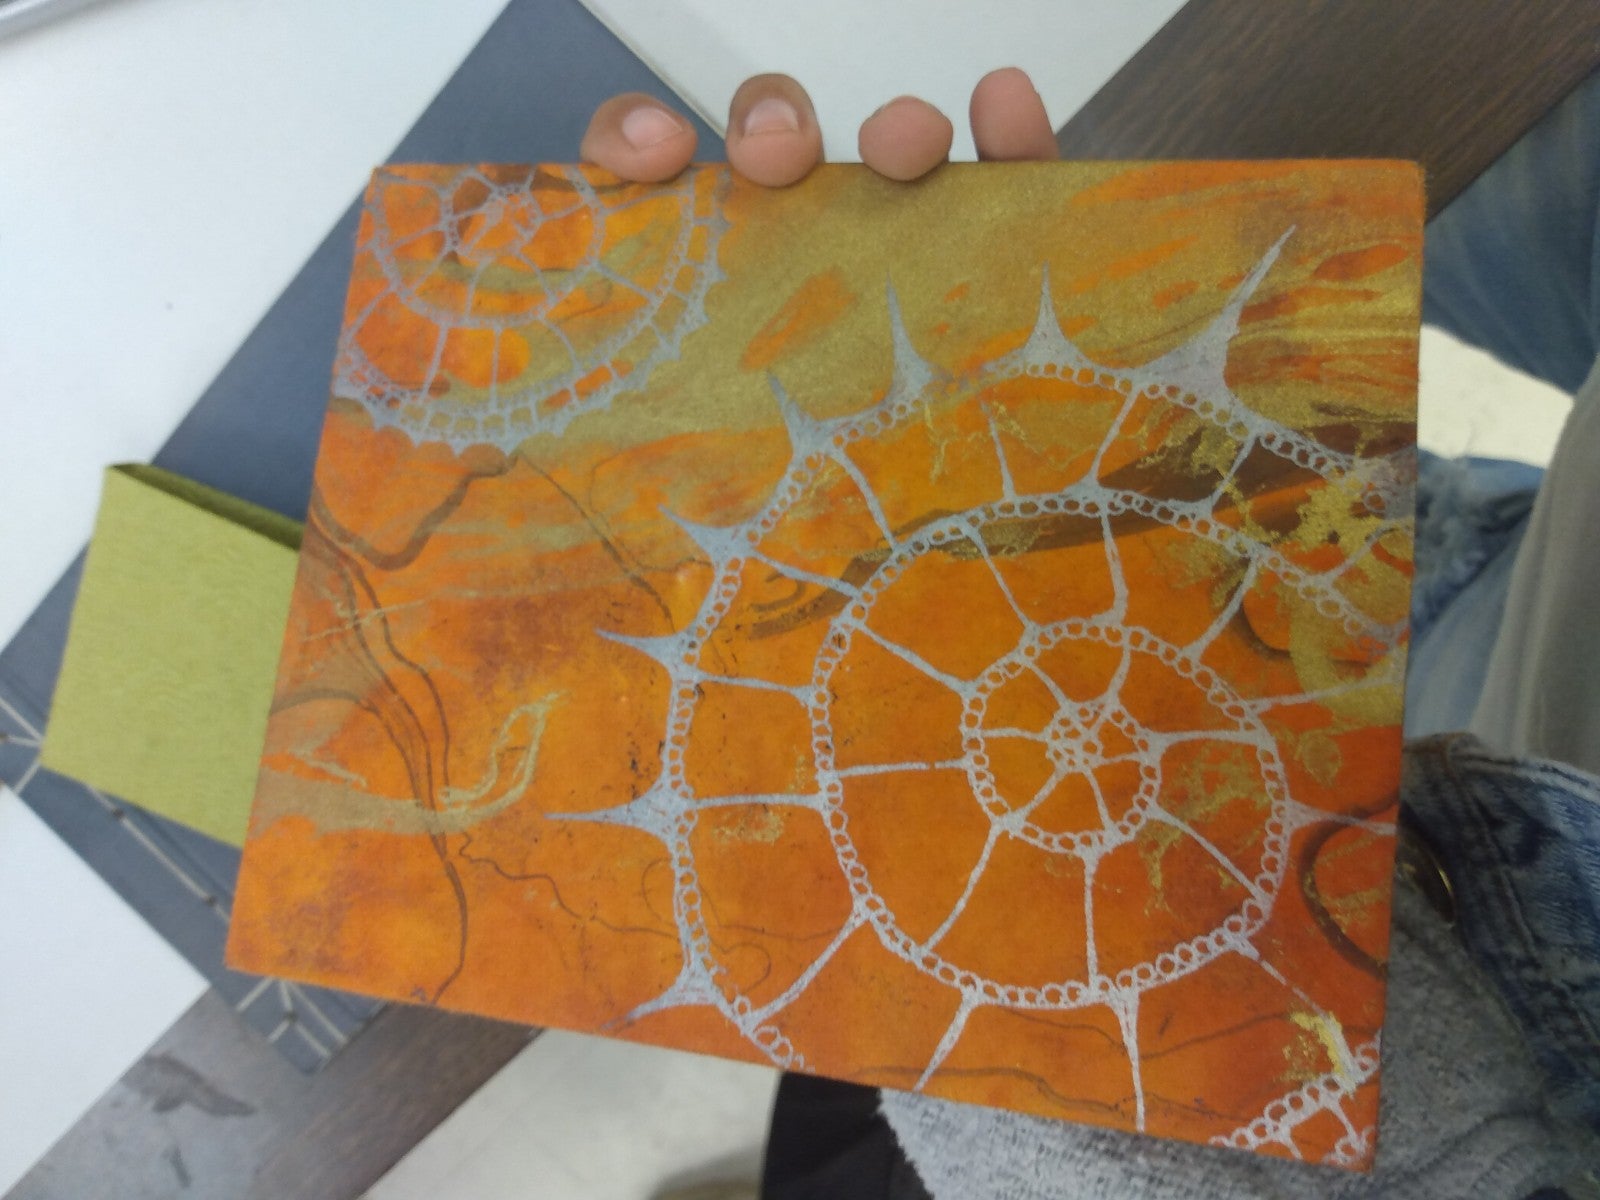 Orange-colored art with a shell pattern is pictured